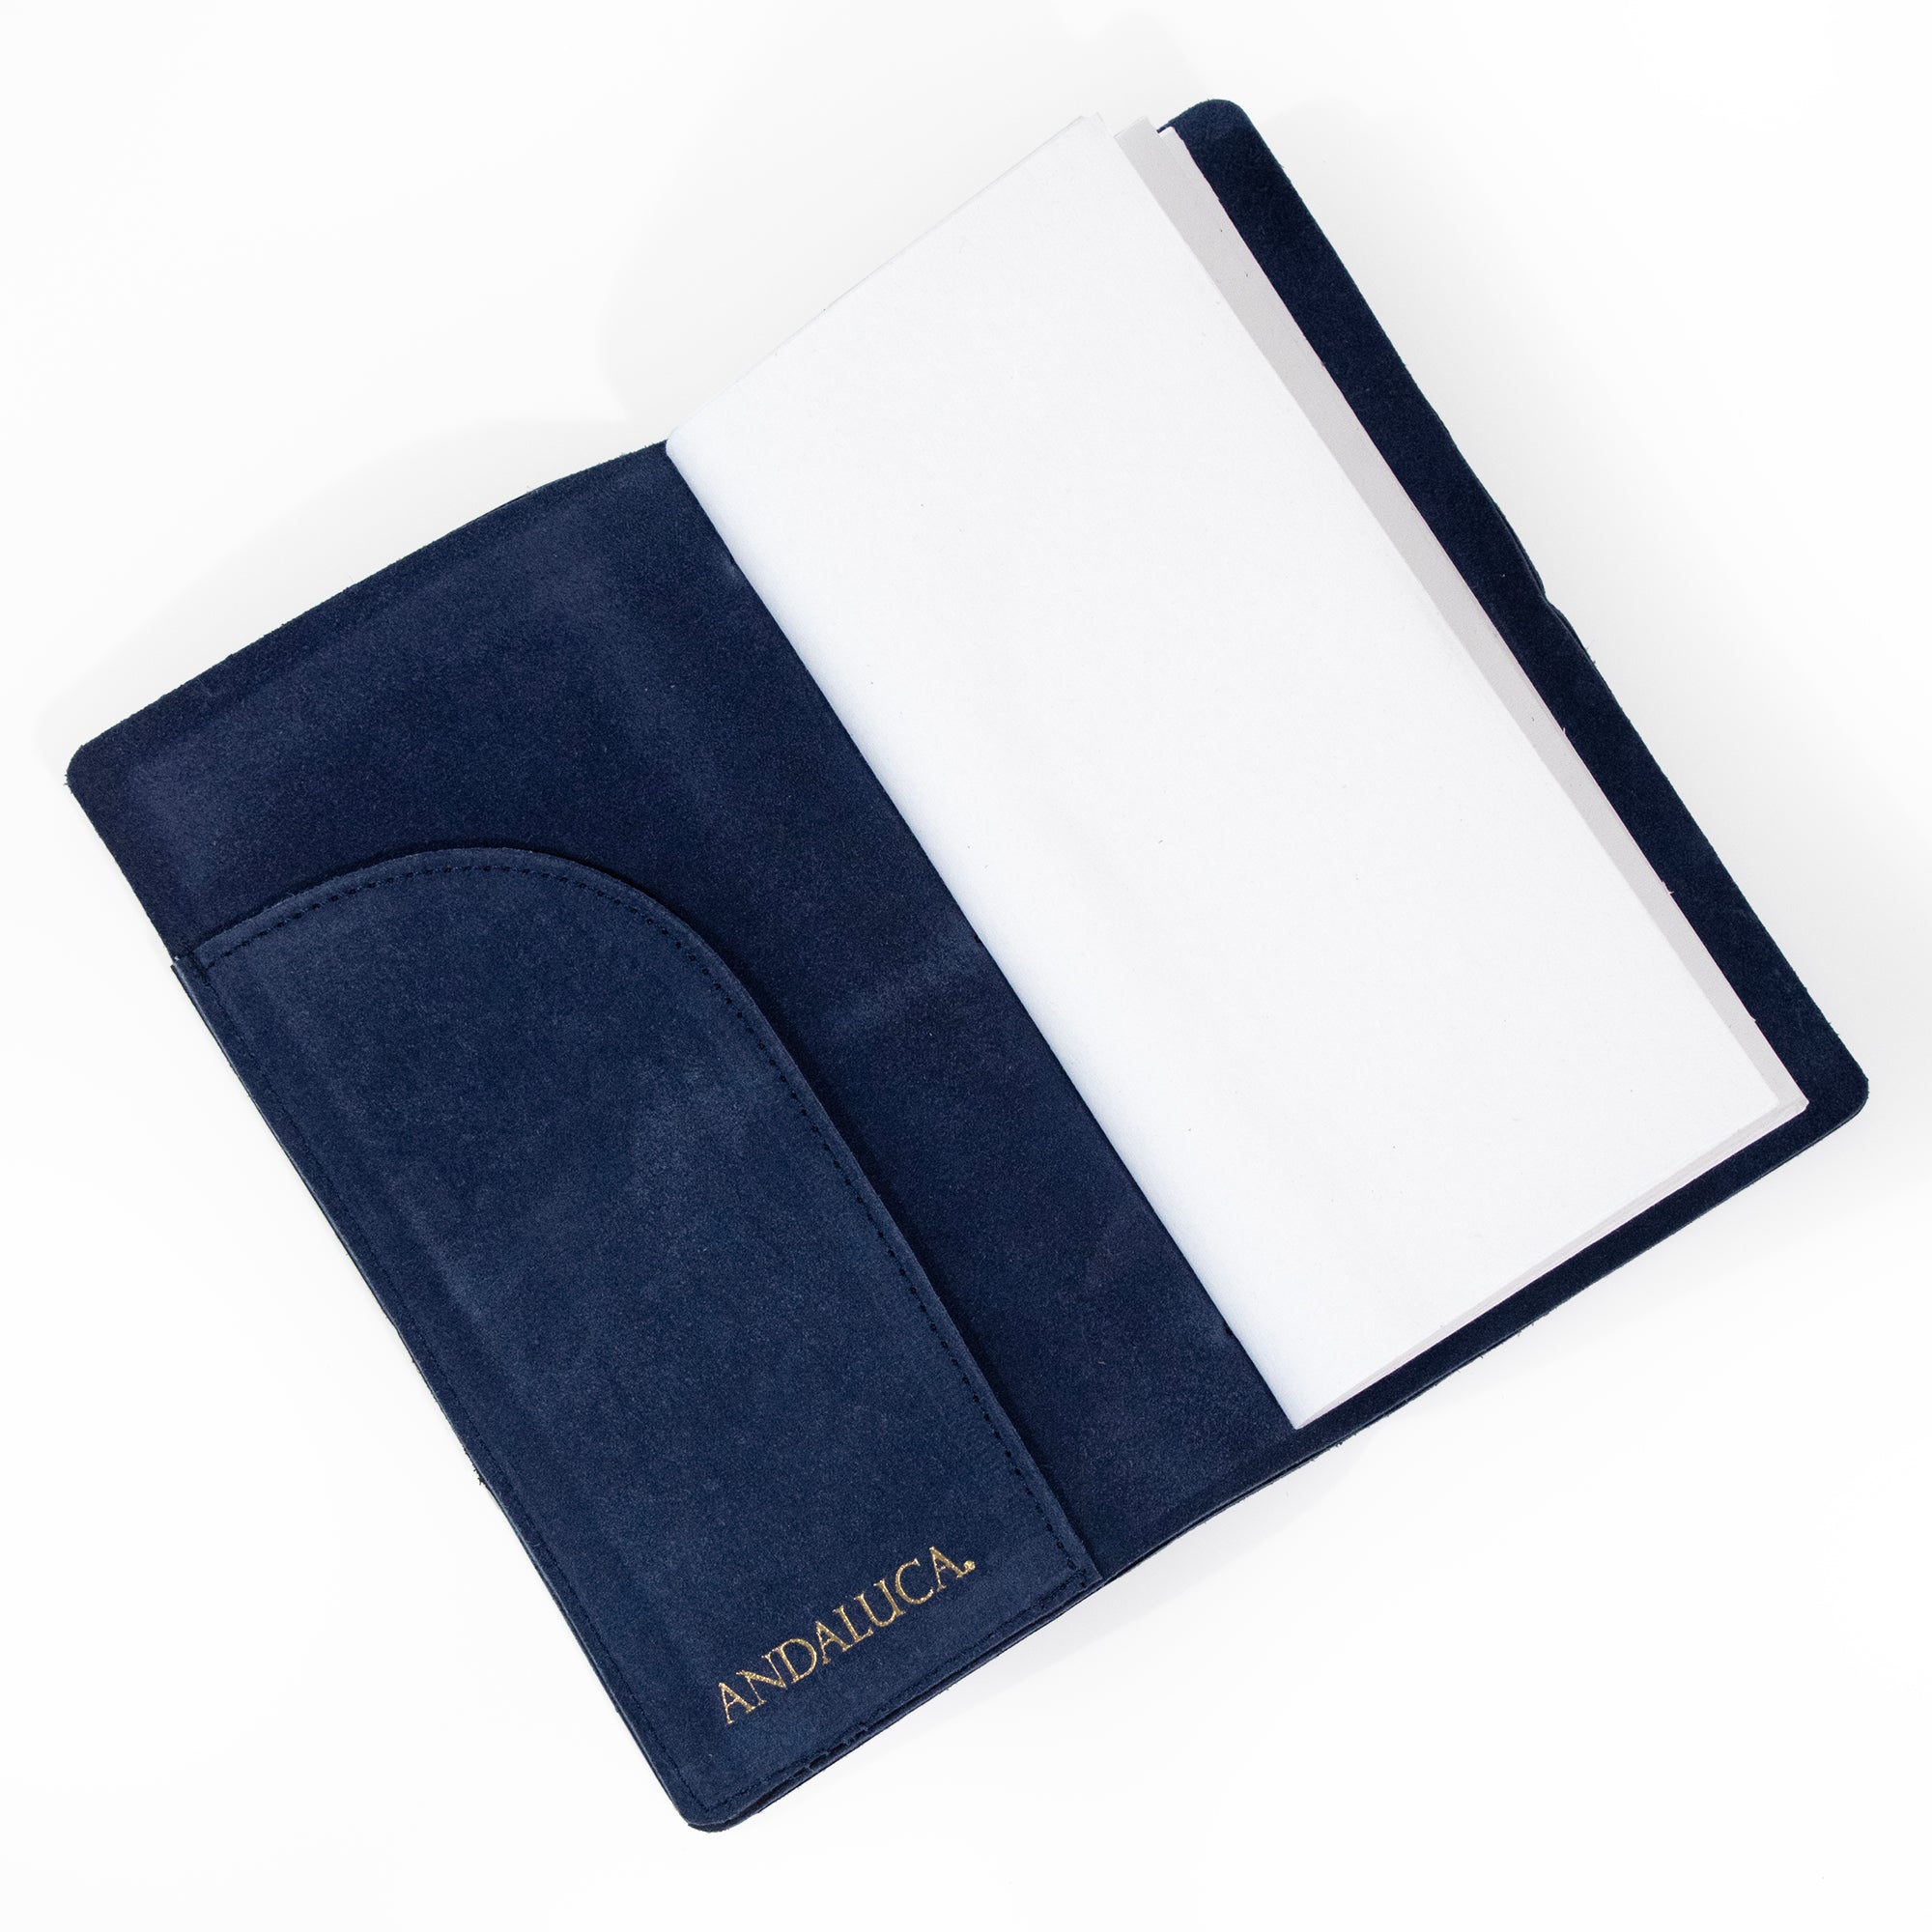 Royal Blue Suede Journal W/ Organic Cotton Paper:  Small